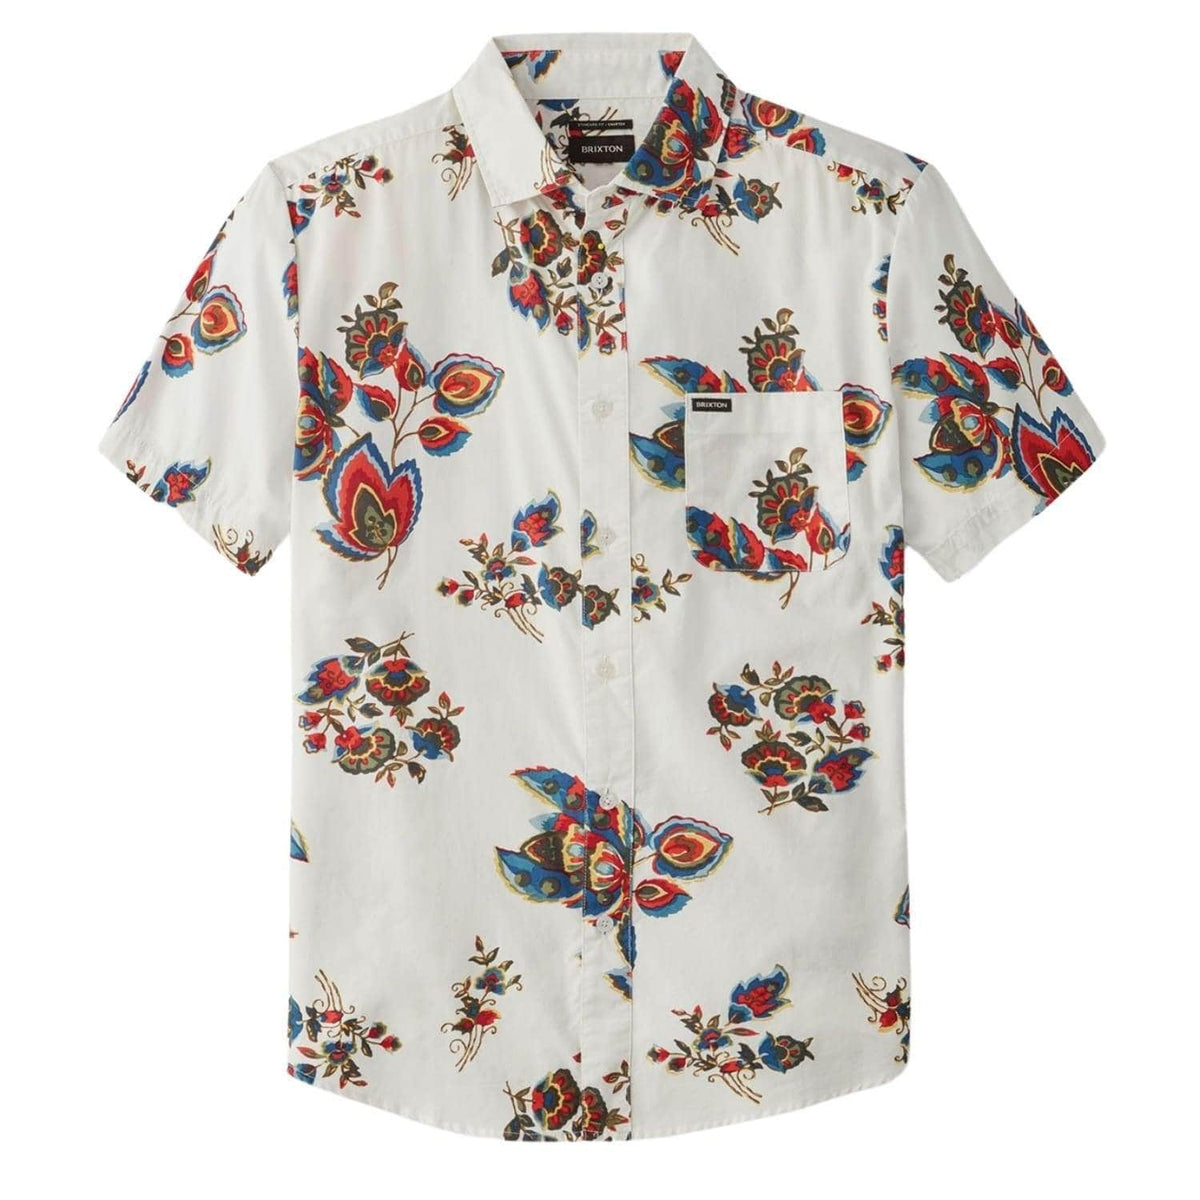 Brixton Charter Print Short Sleeve Woven Shirt - Off White/Red